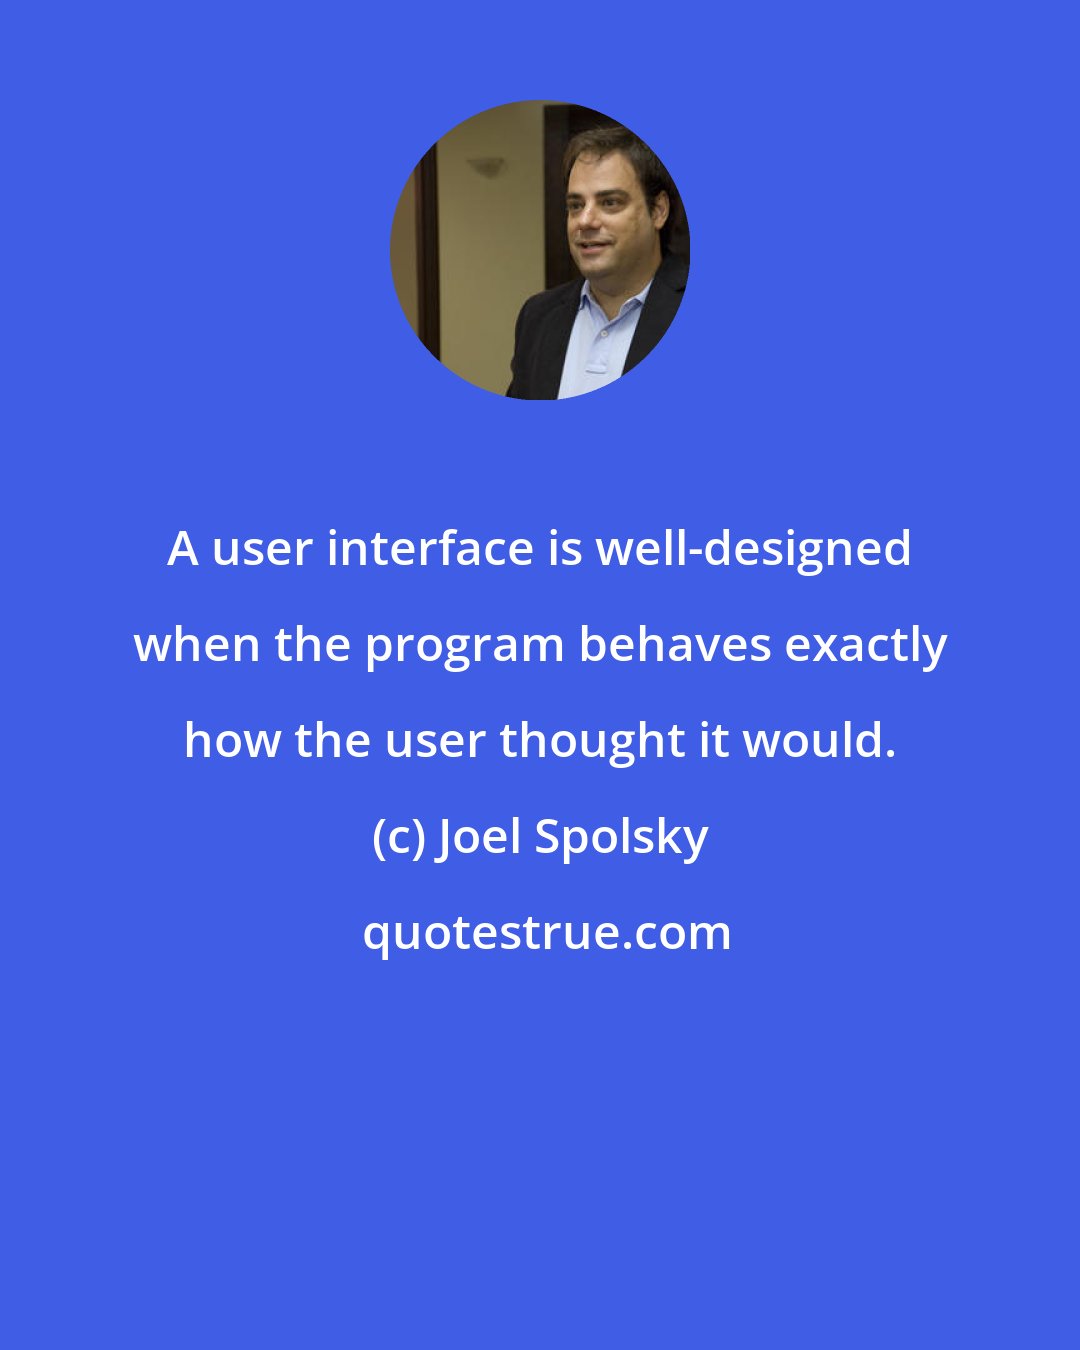 Joel Spolsky: A user interface is well-designed when the program behaves exactly how the user thought it would.